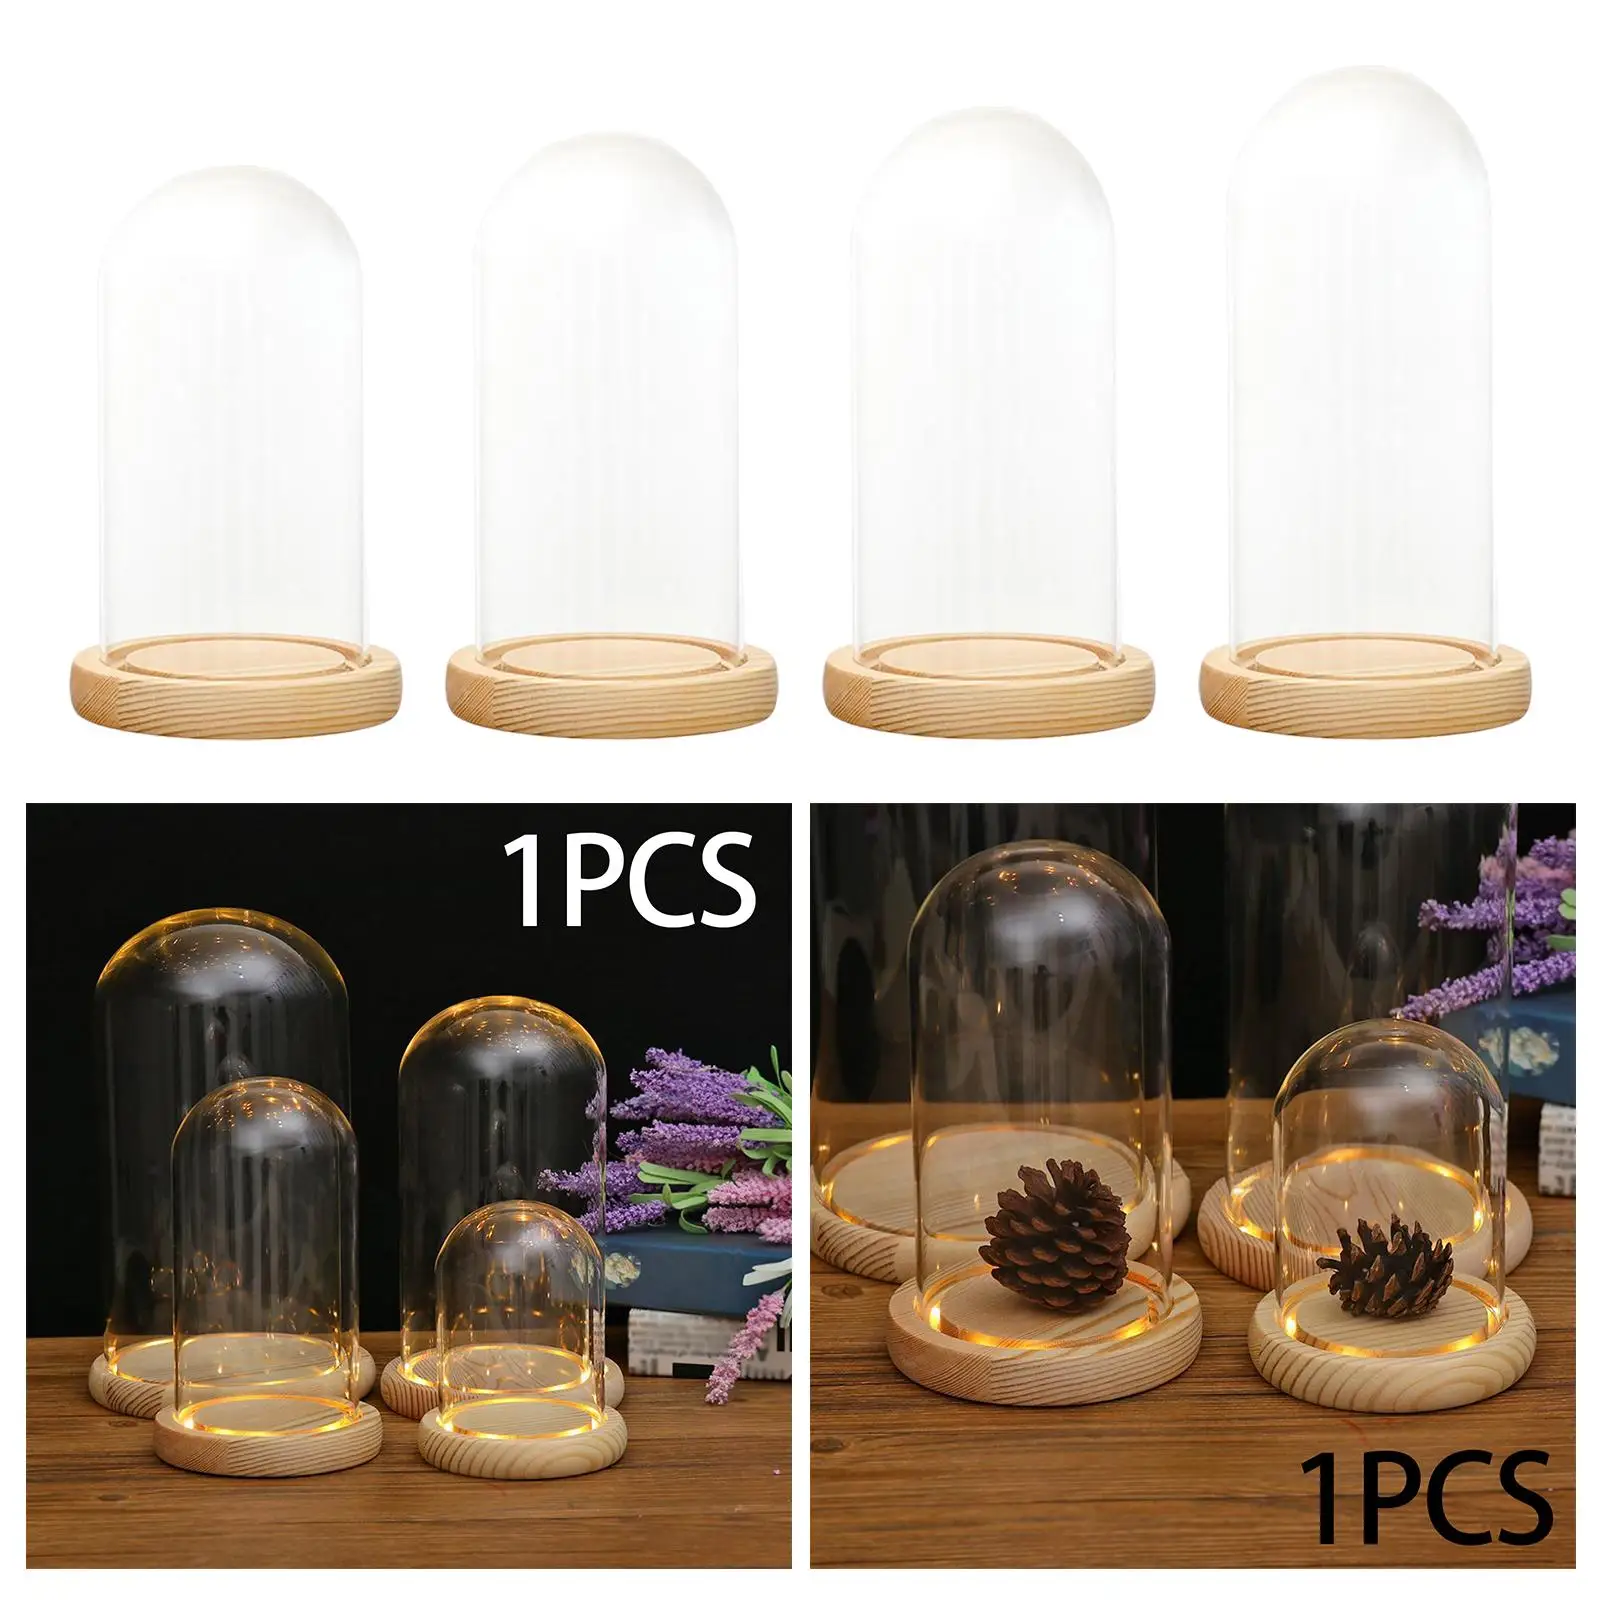 Clear Glass Dome Cloche Decorative Micro Landscape Holder with Base Display Jar Case for Antique Collectibles Showcase Wedding